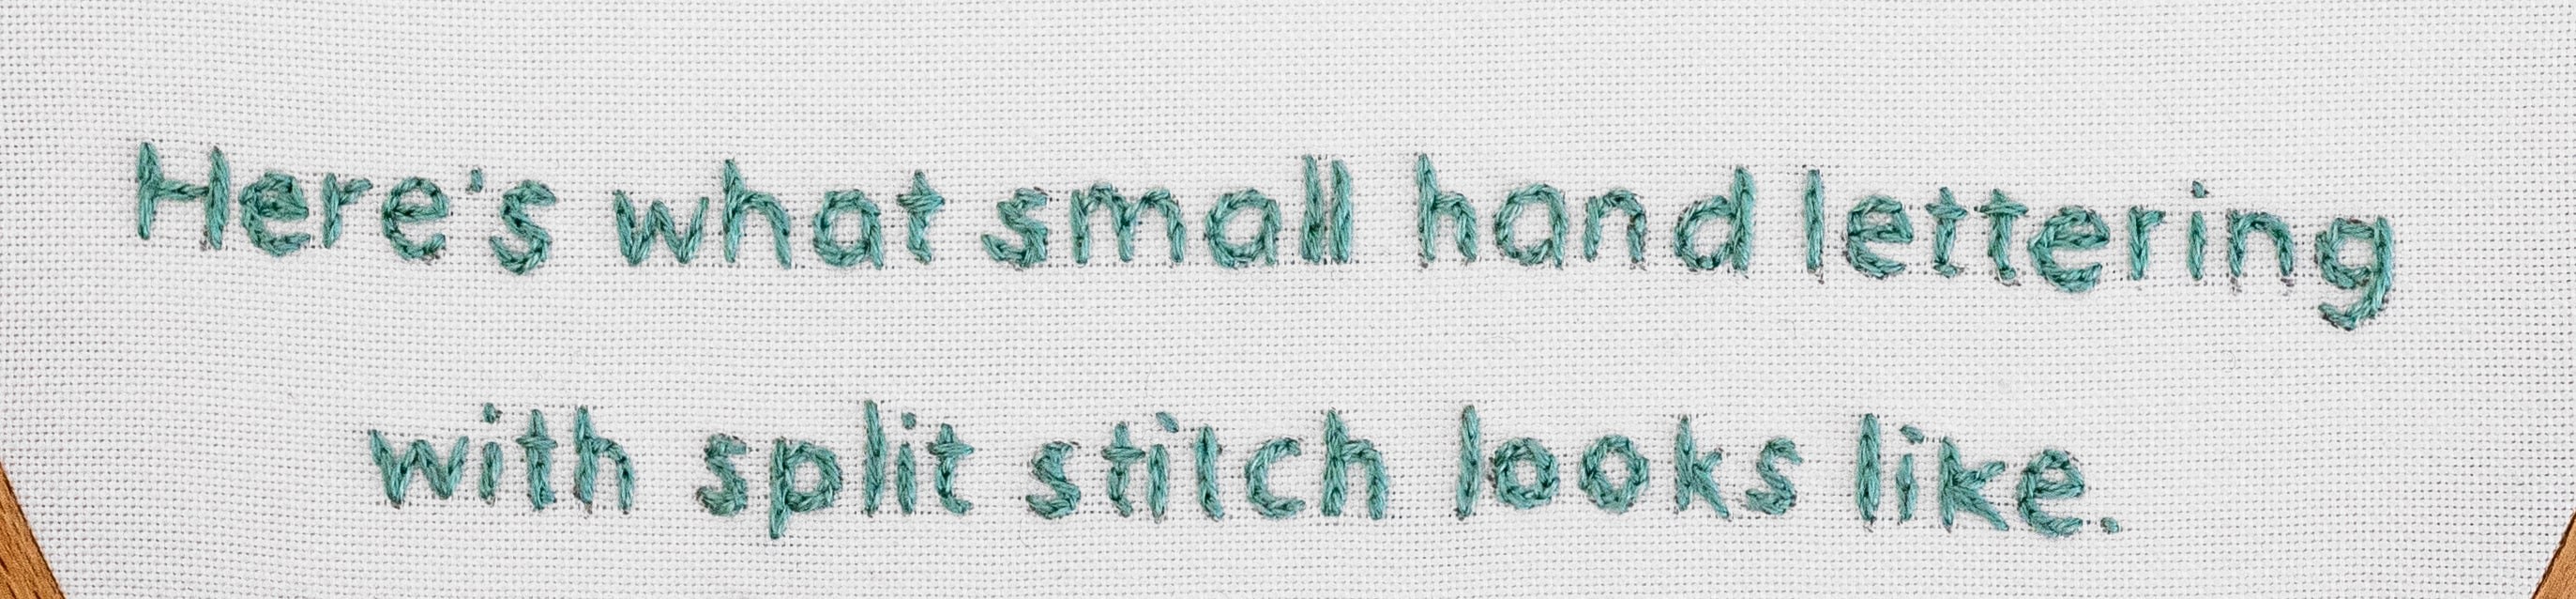 This is a sentence stitched with modern embroidery using split stitch.